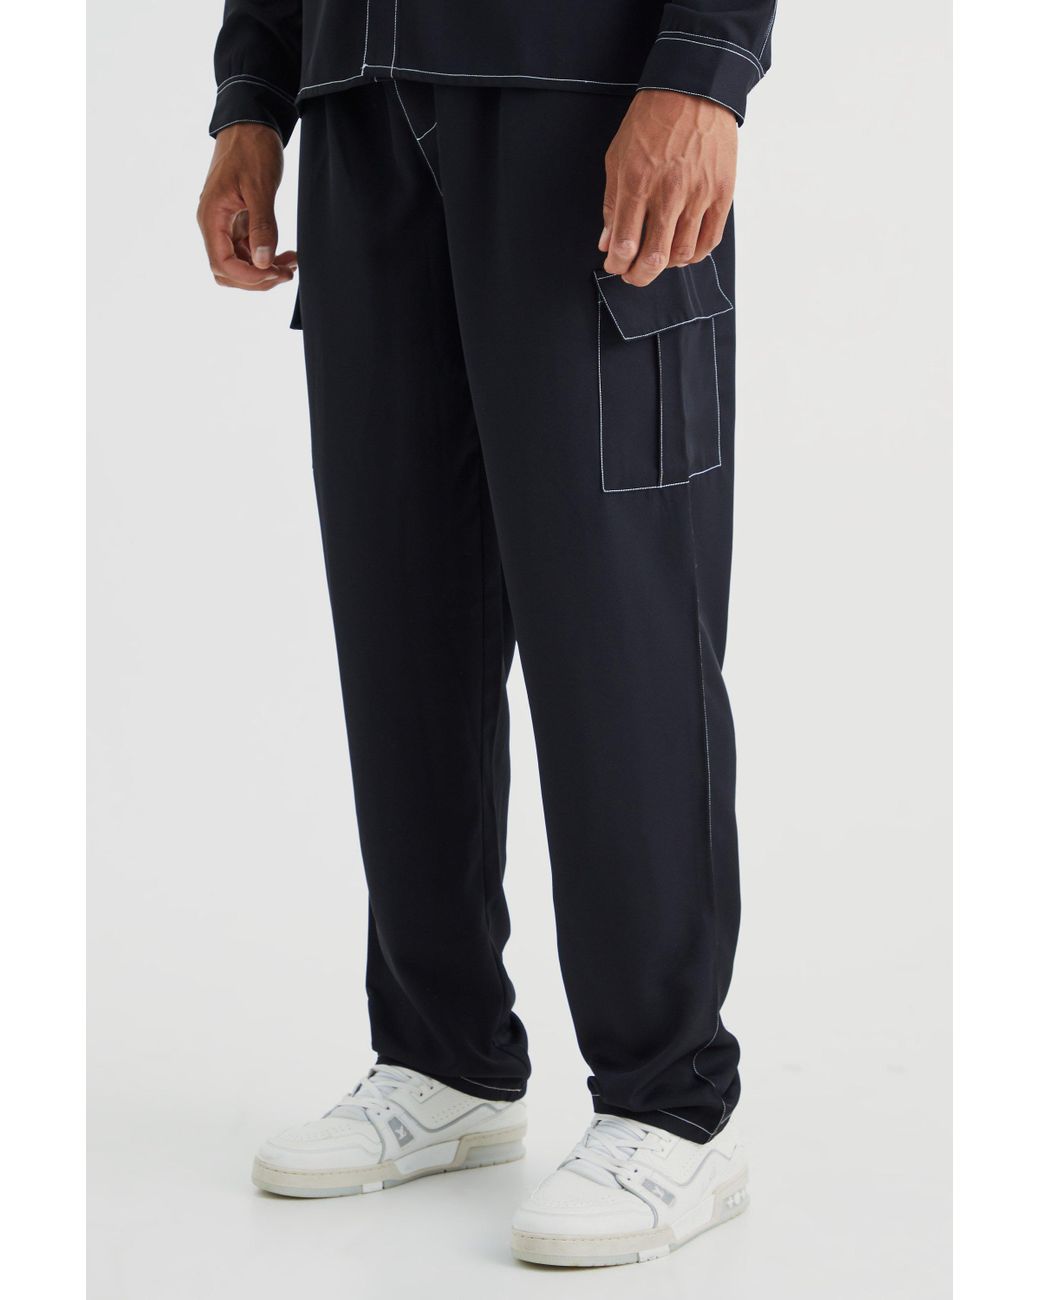 ASOS DESIGN seam detail cargo pants in black with contrast stitch